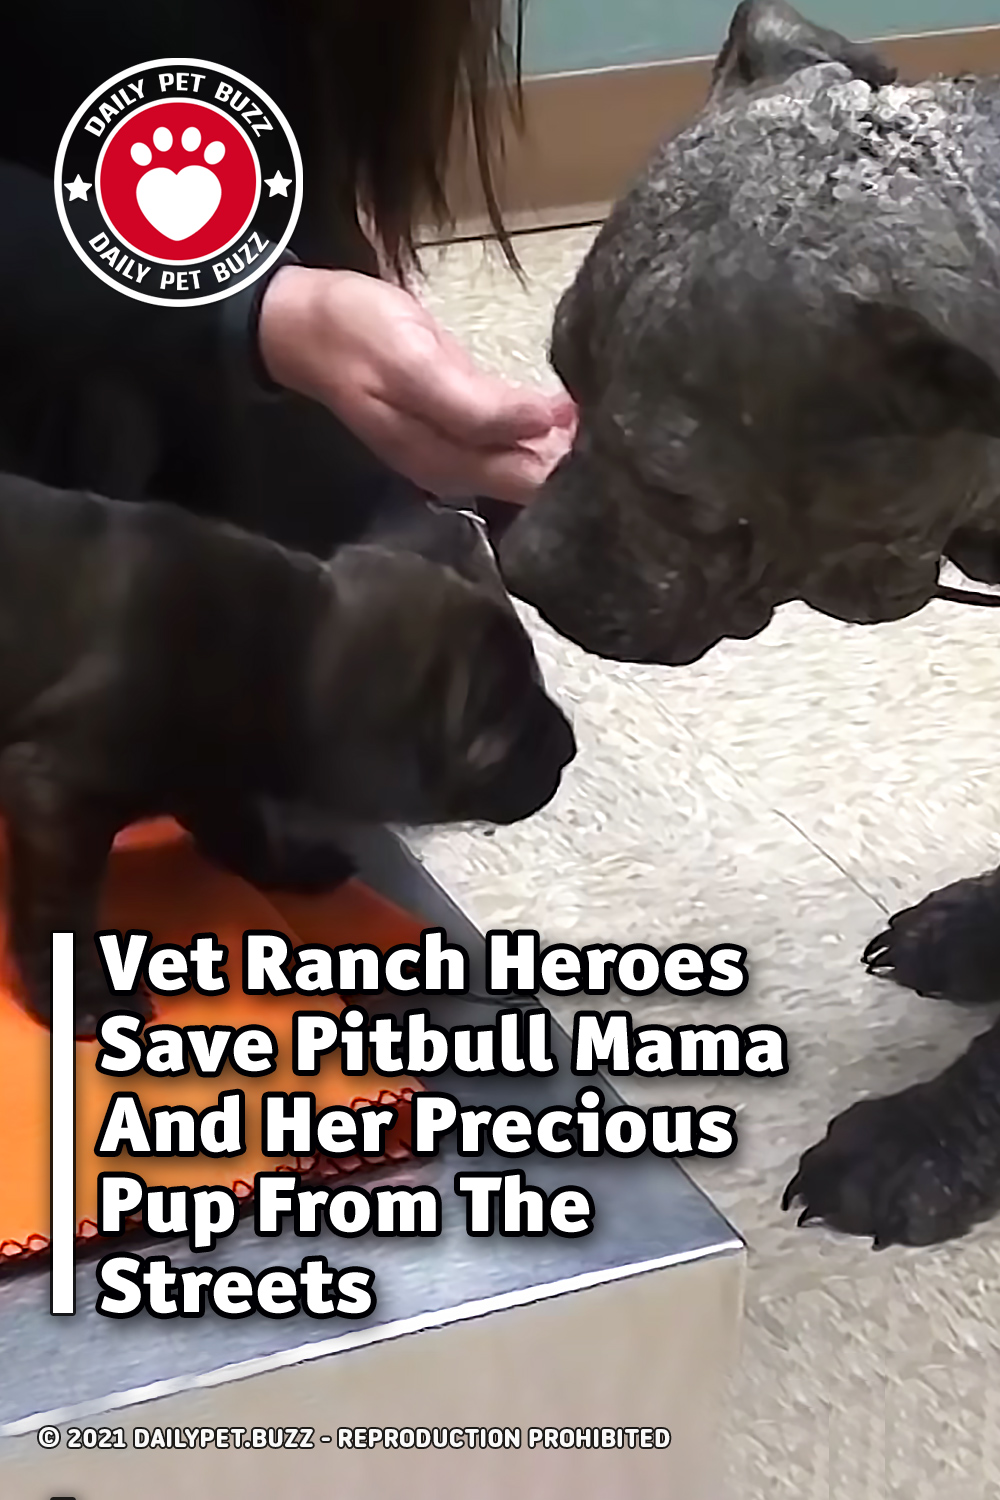 Vet Ranch Heroes Save Pitbull Mama And Her Precious Pup From The Streets